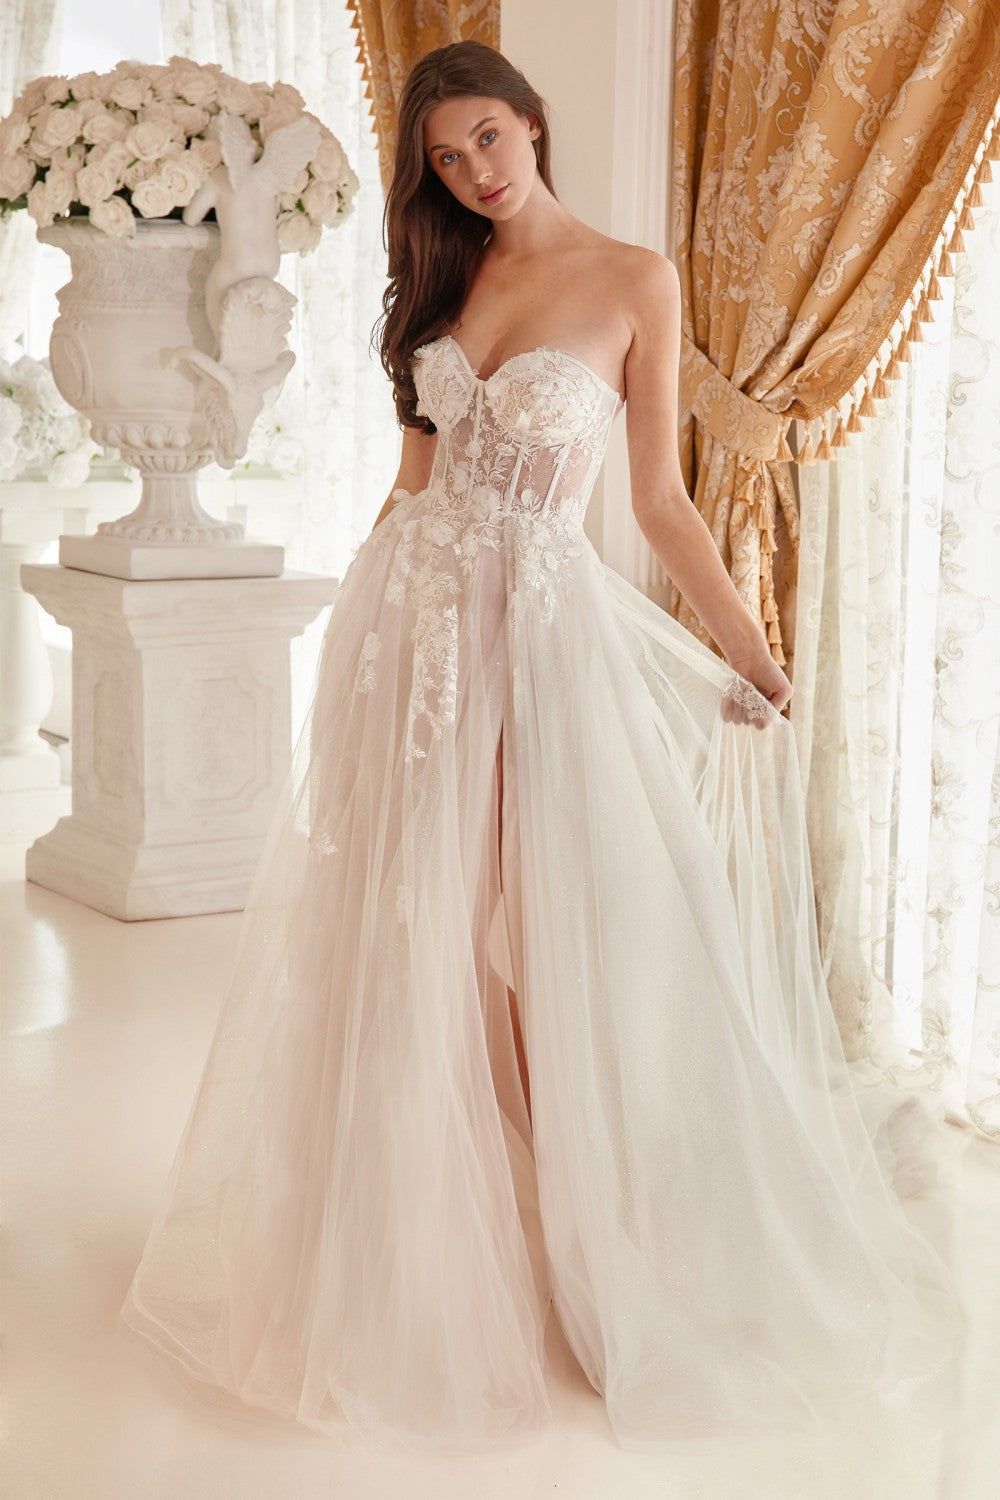 Penelope Blossom Bridal Gown By Andrea And Leo -A1089W